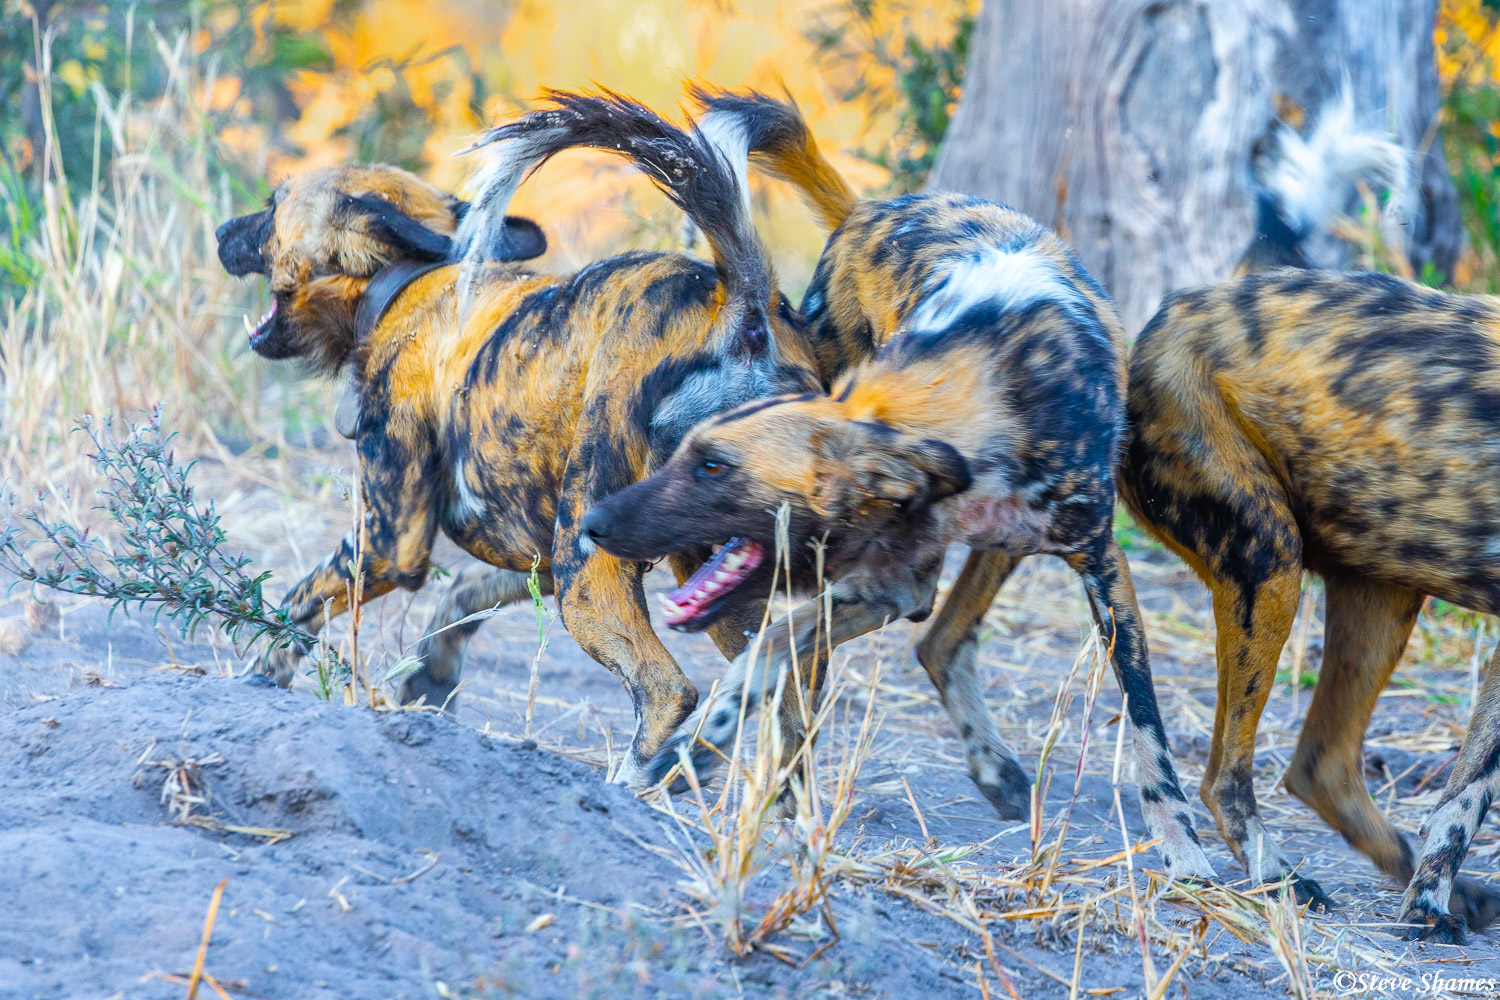 An African wild dog pack, so happy to see each other!